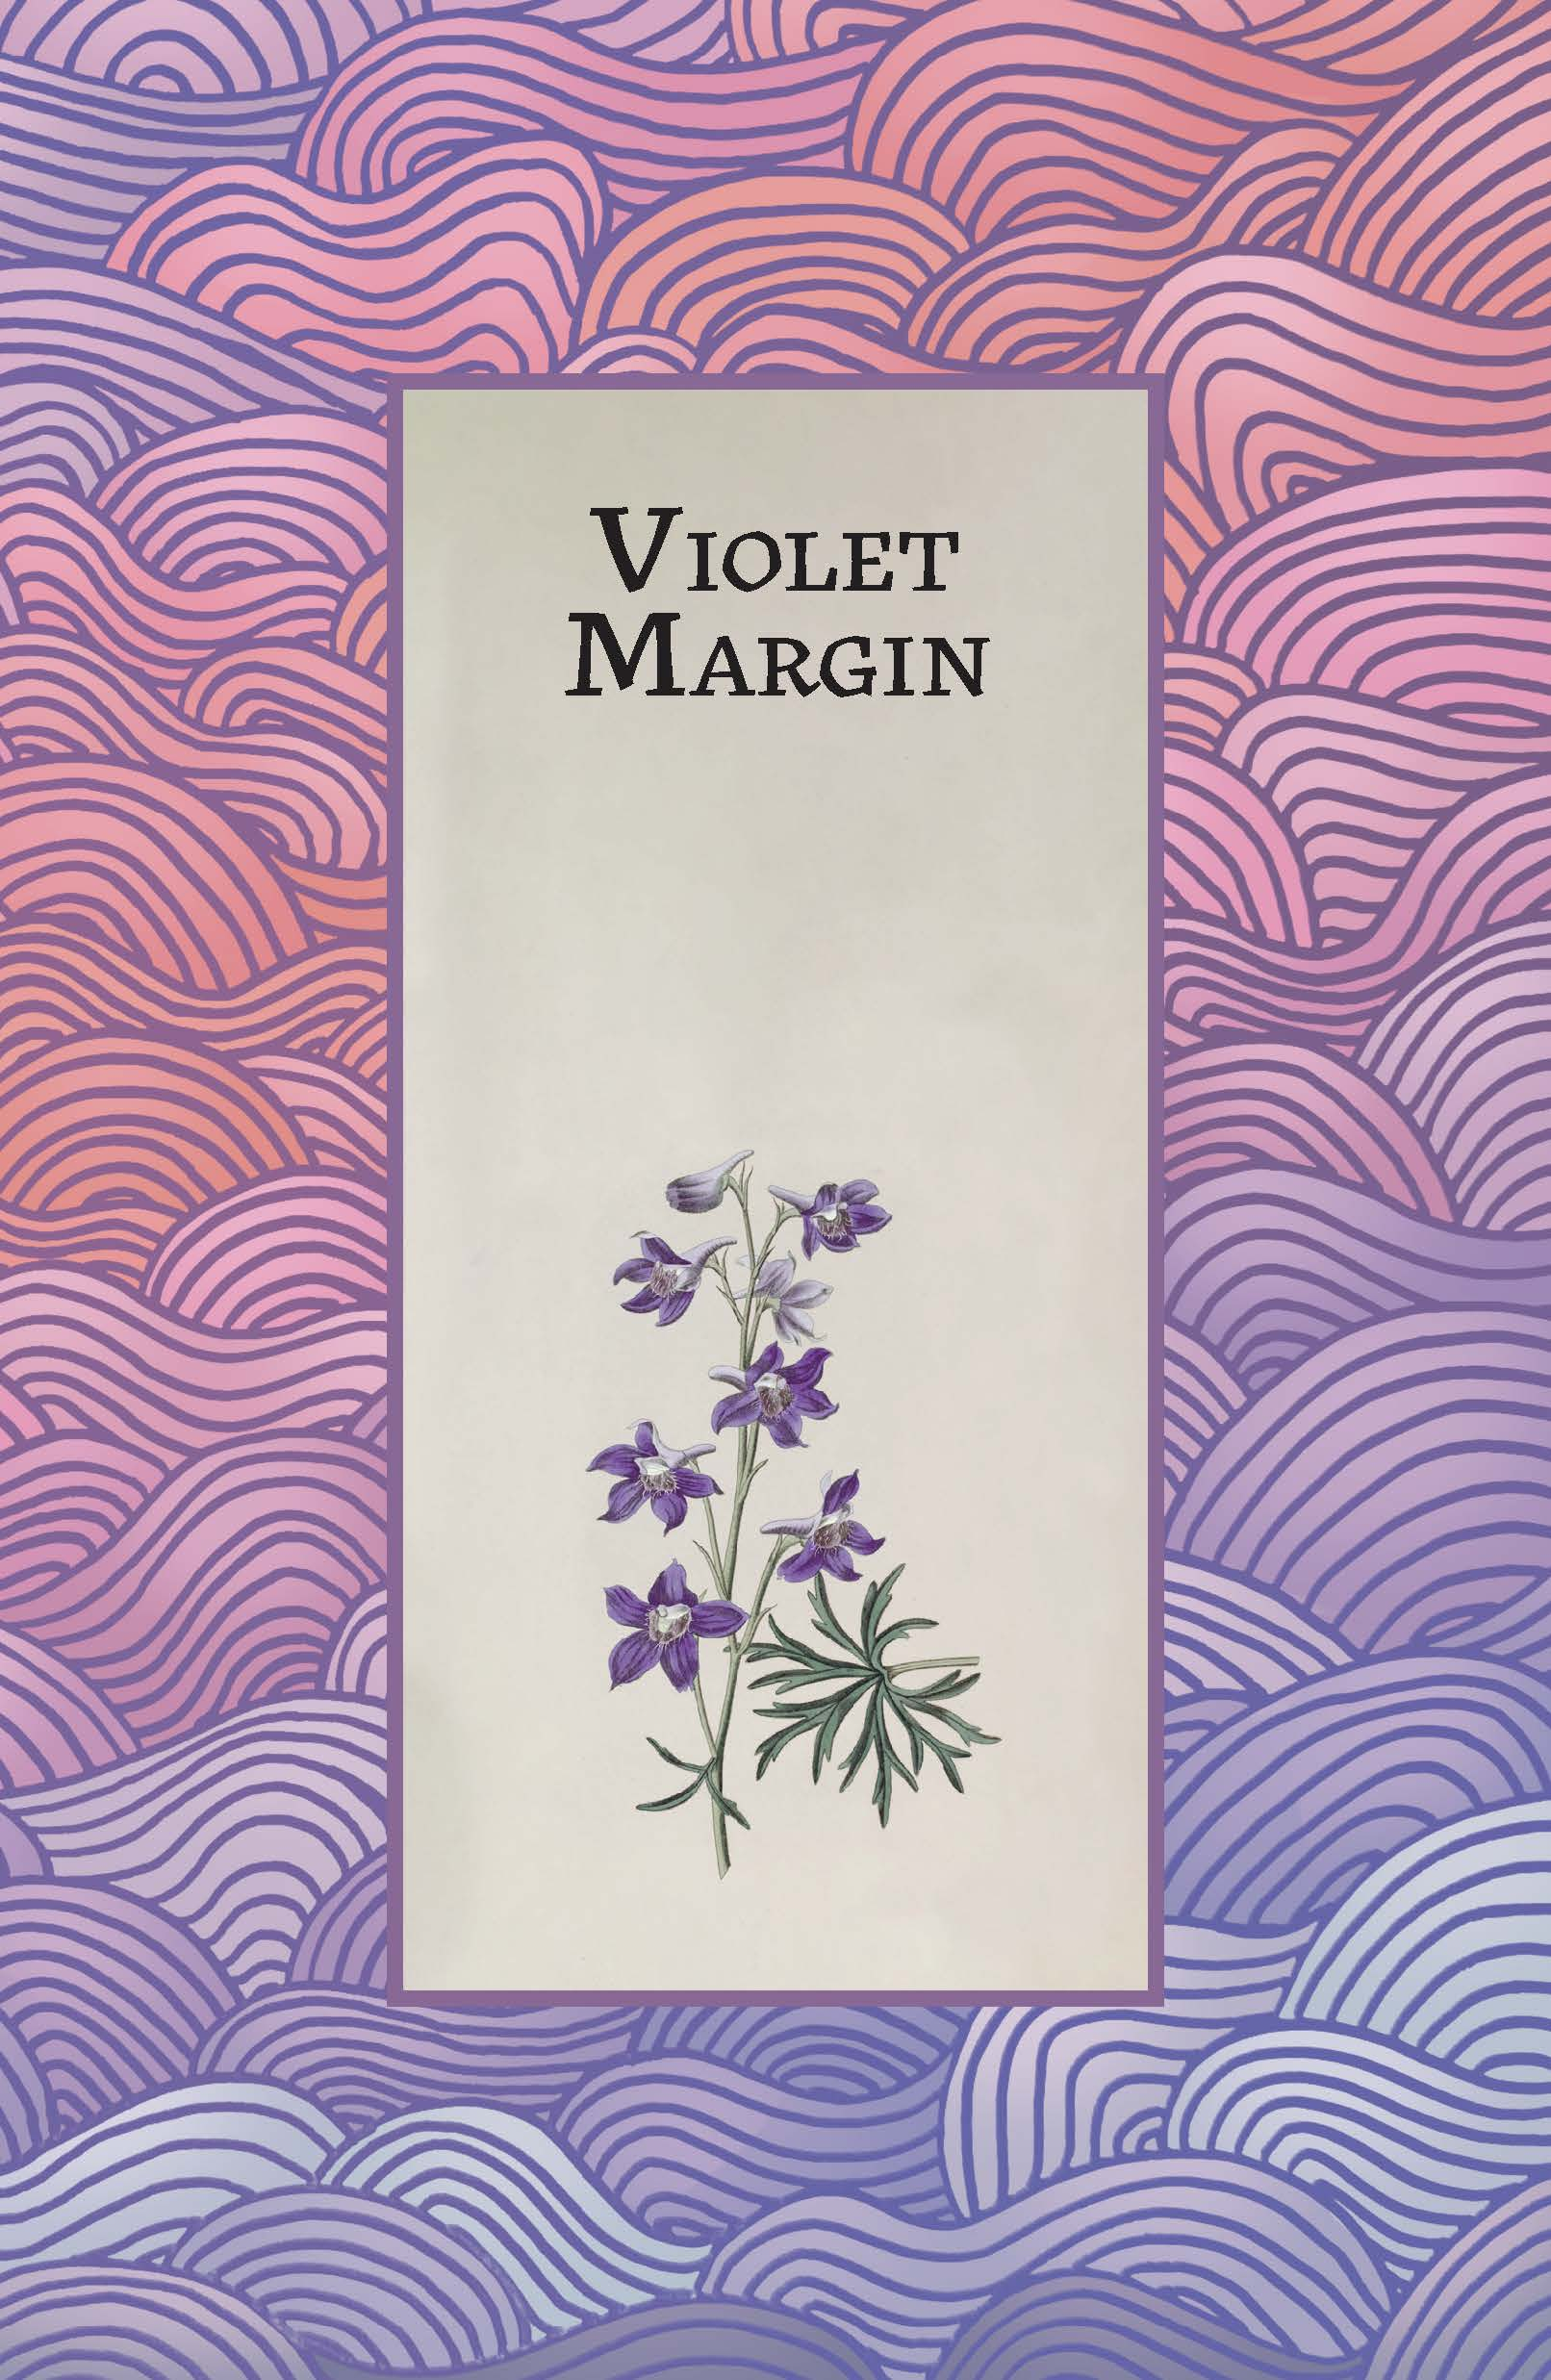 cover art of purple flowers and waves for the Violet margin